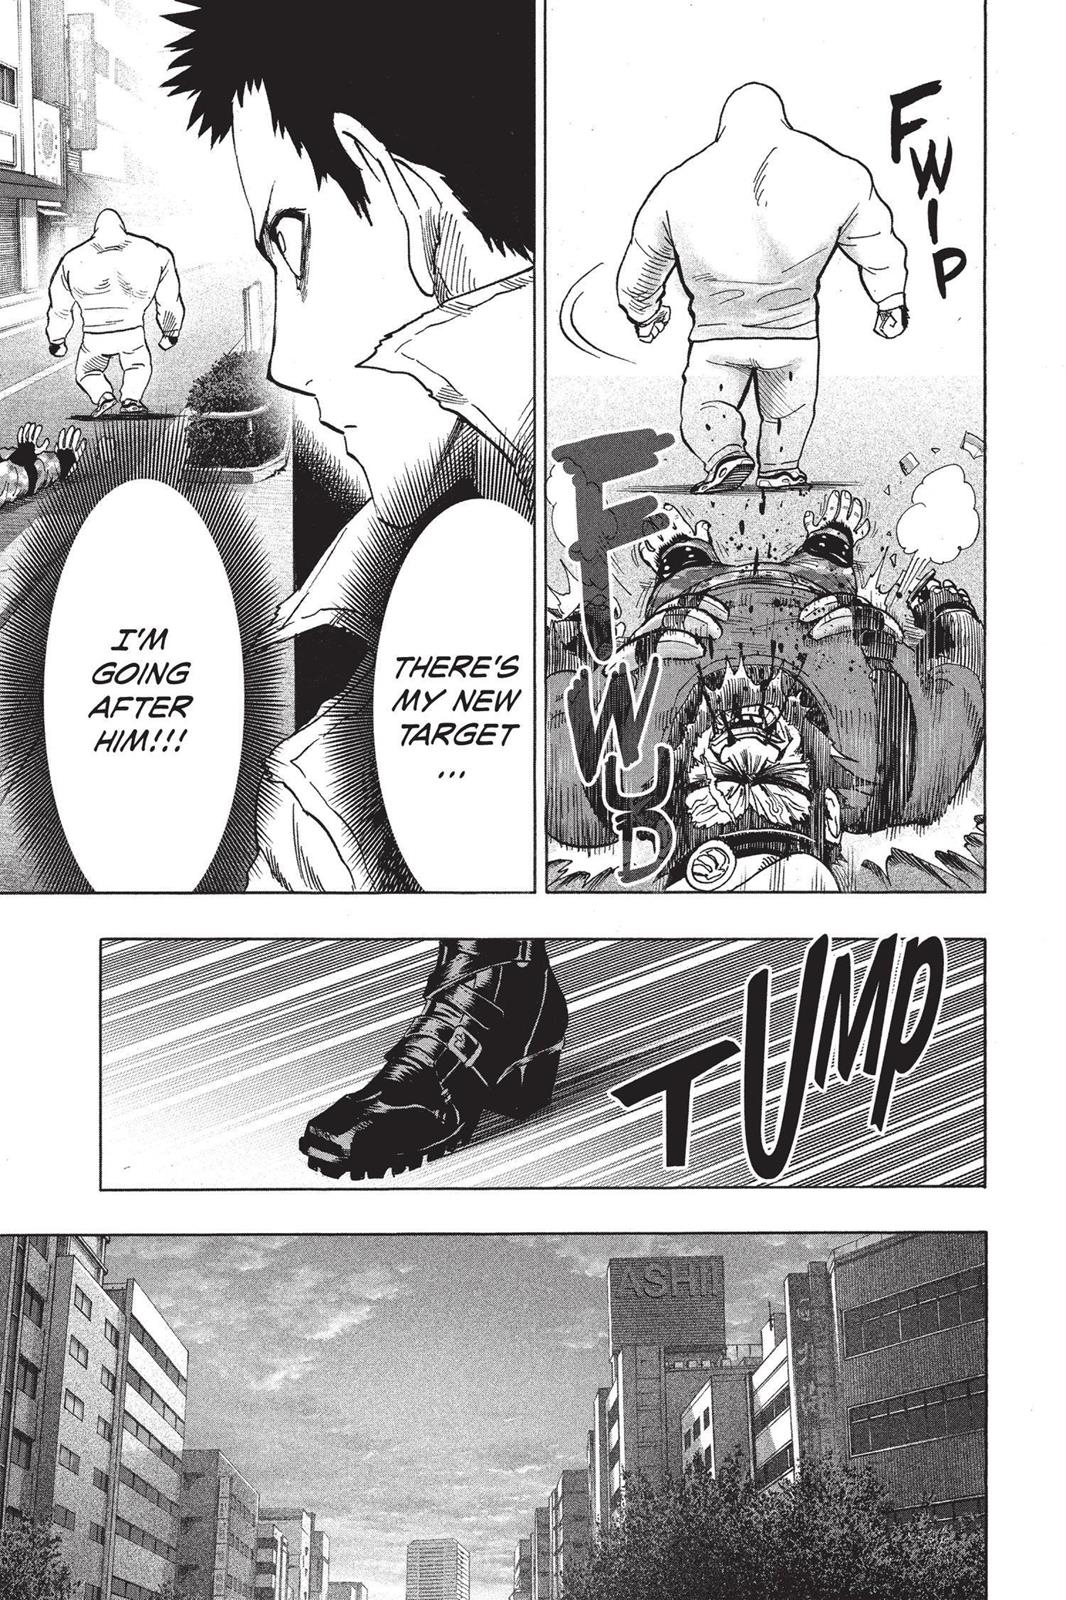 One-Punch Man, Punch 78 image 35